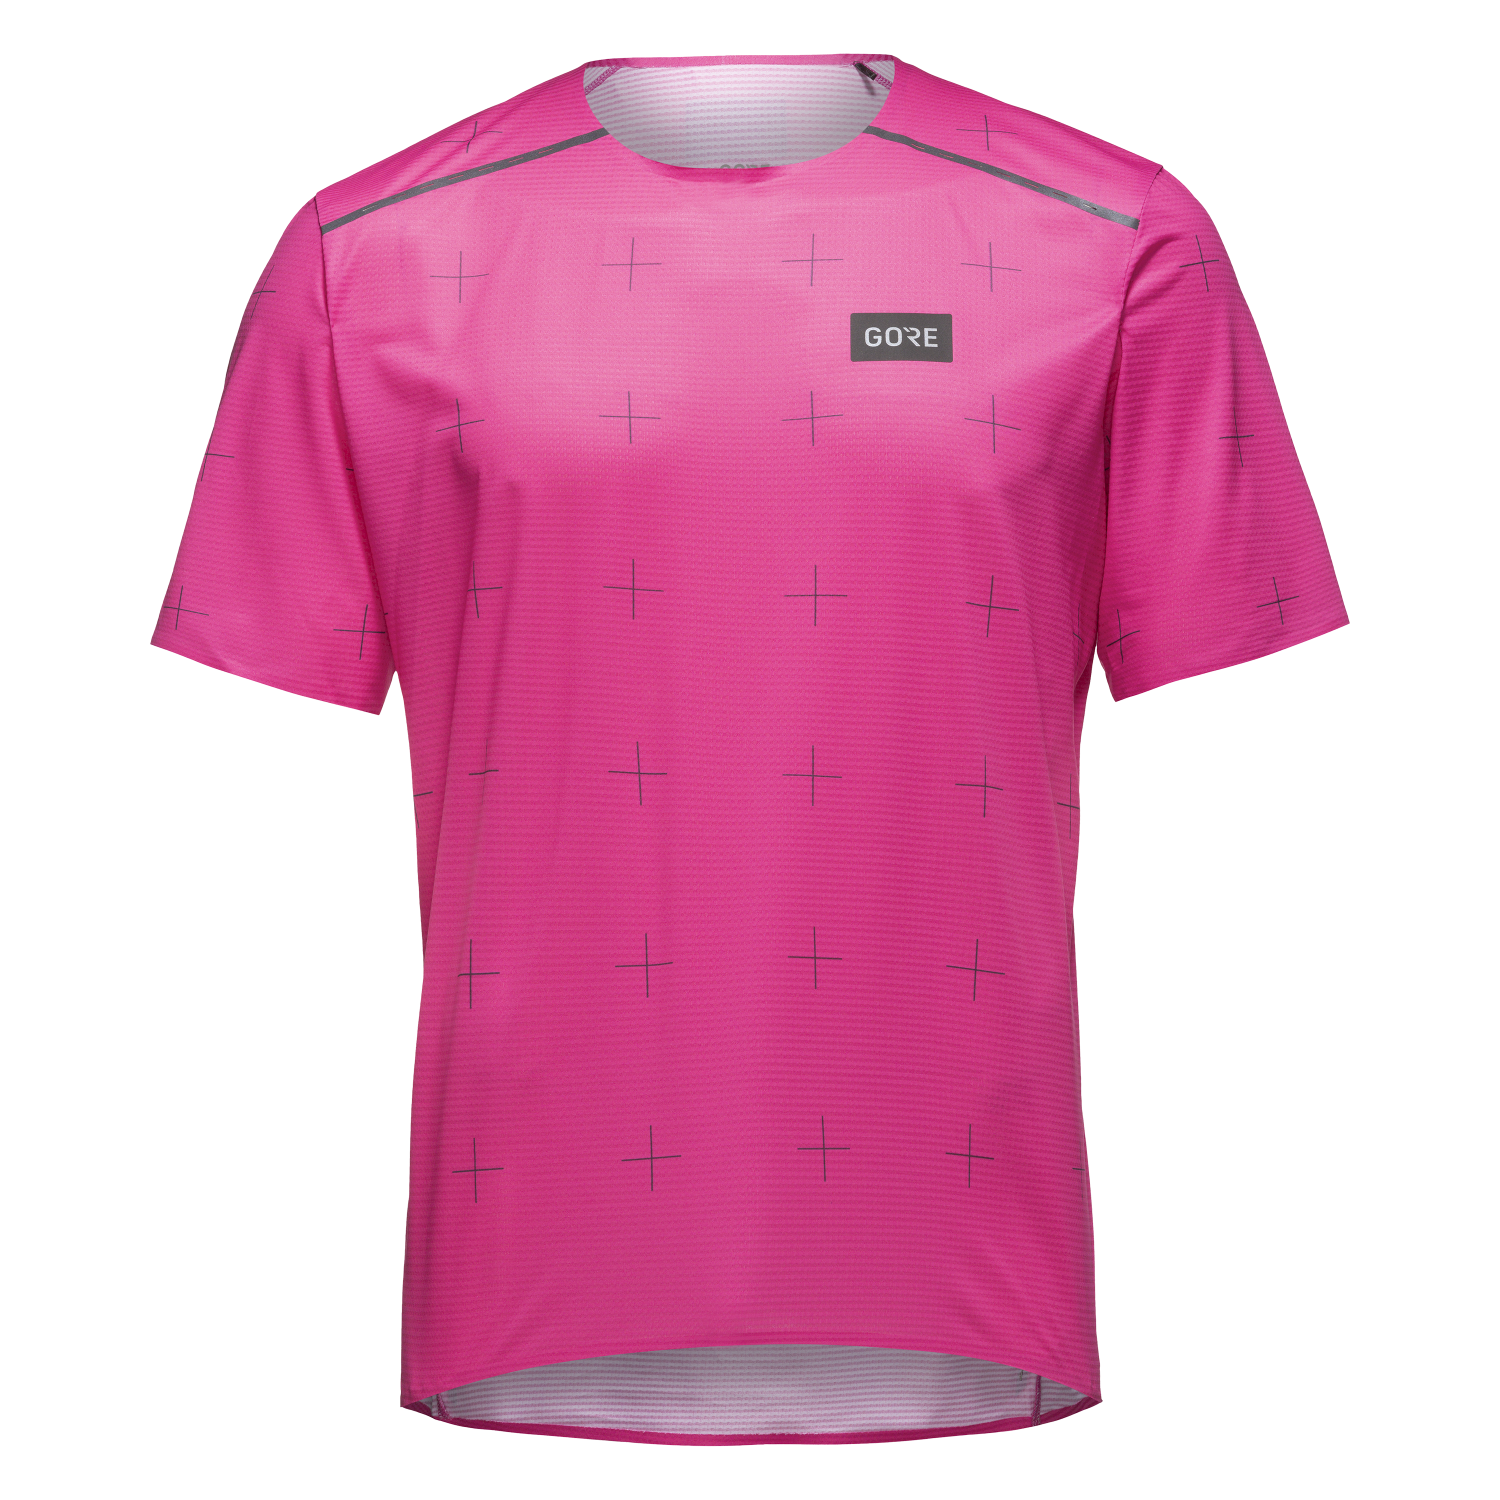 GOREWEAR Contest Daily Running Tee Men's in Process Pink | Small | Slim fit